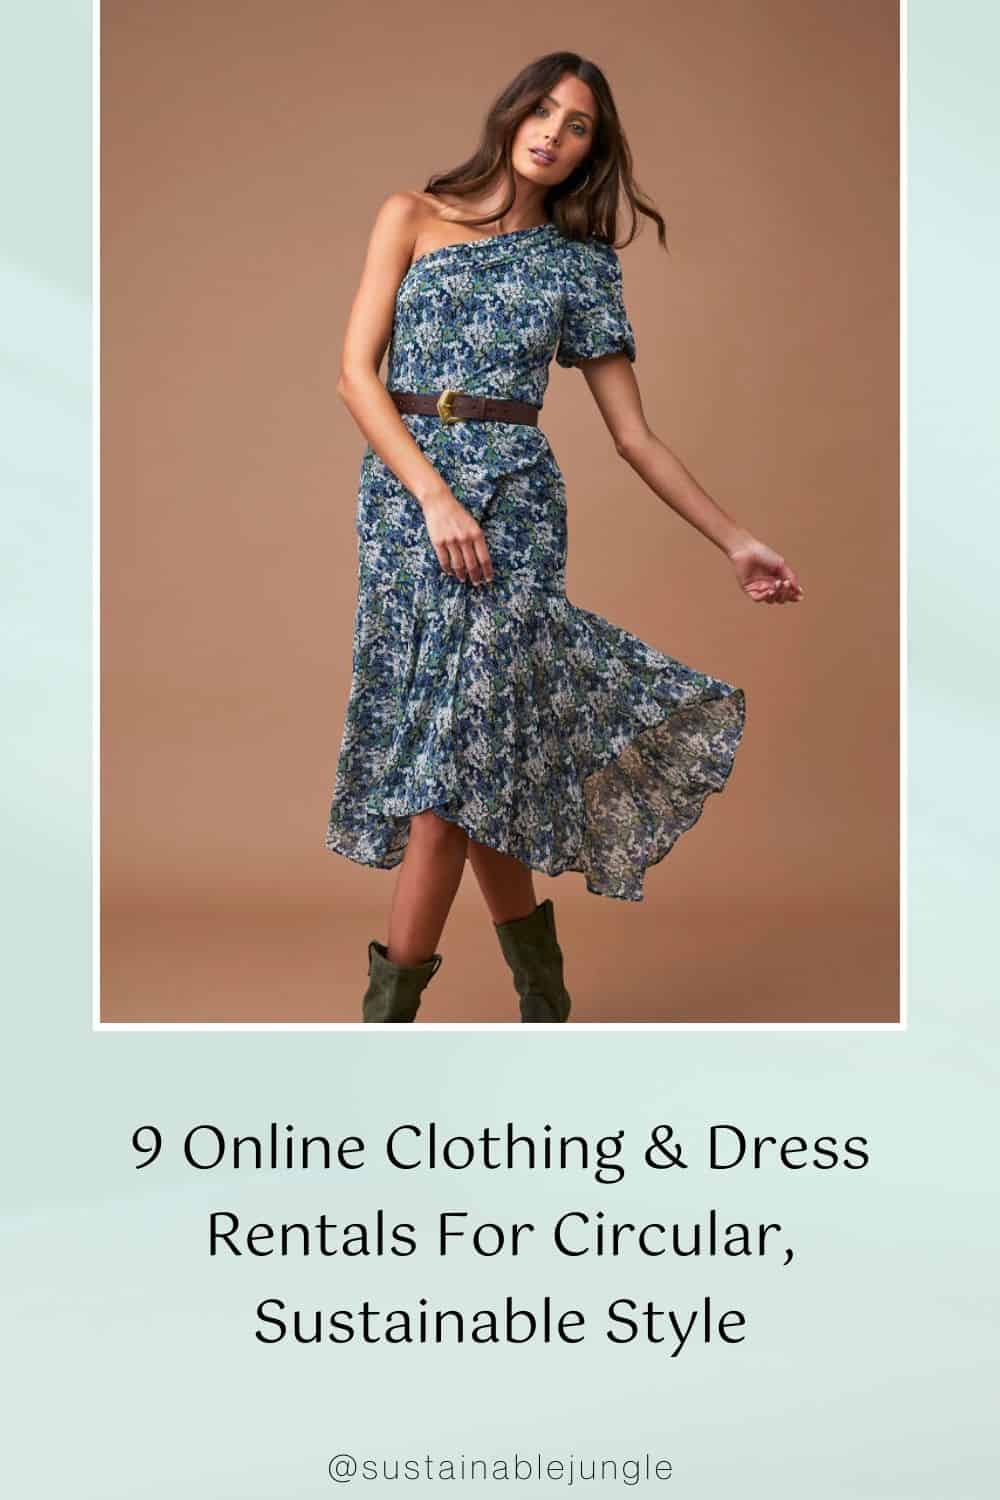 9 Online Clothing & Dress Rentals For Circular, Sustainable Style Image by Fashion Pass #dressrentals #rentdresses #dressrentalonline #formaldressrental #clothingrentalonline #onlineclothingrental #sustainablejungle